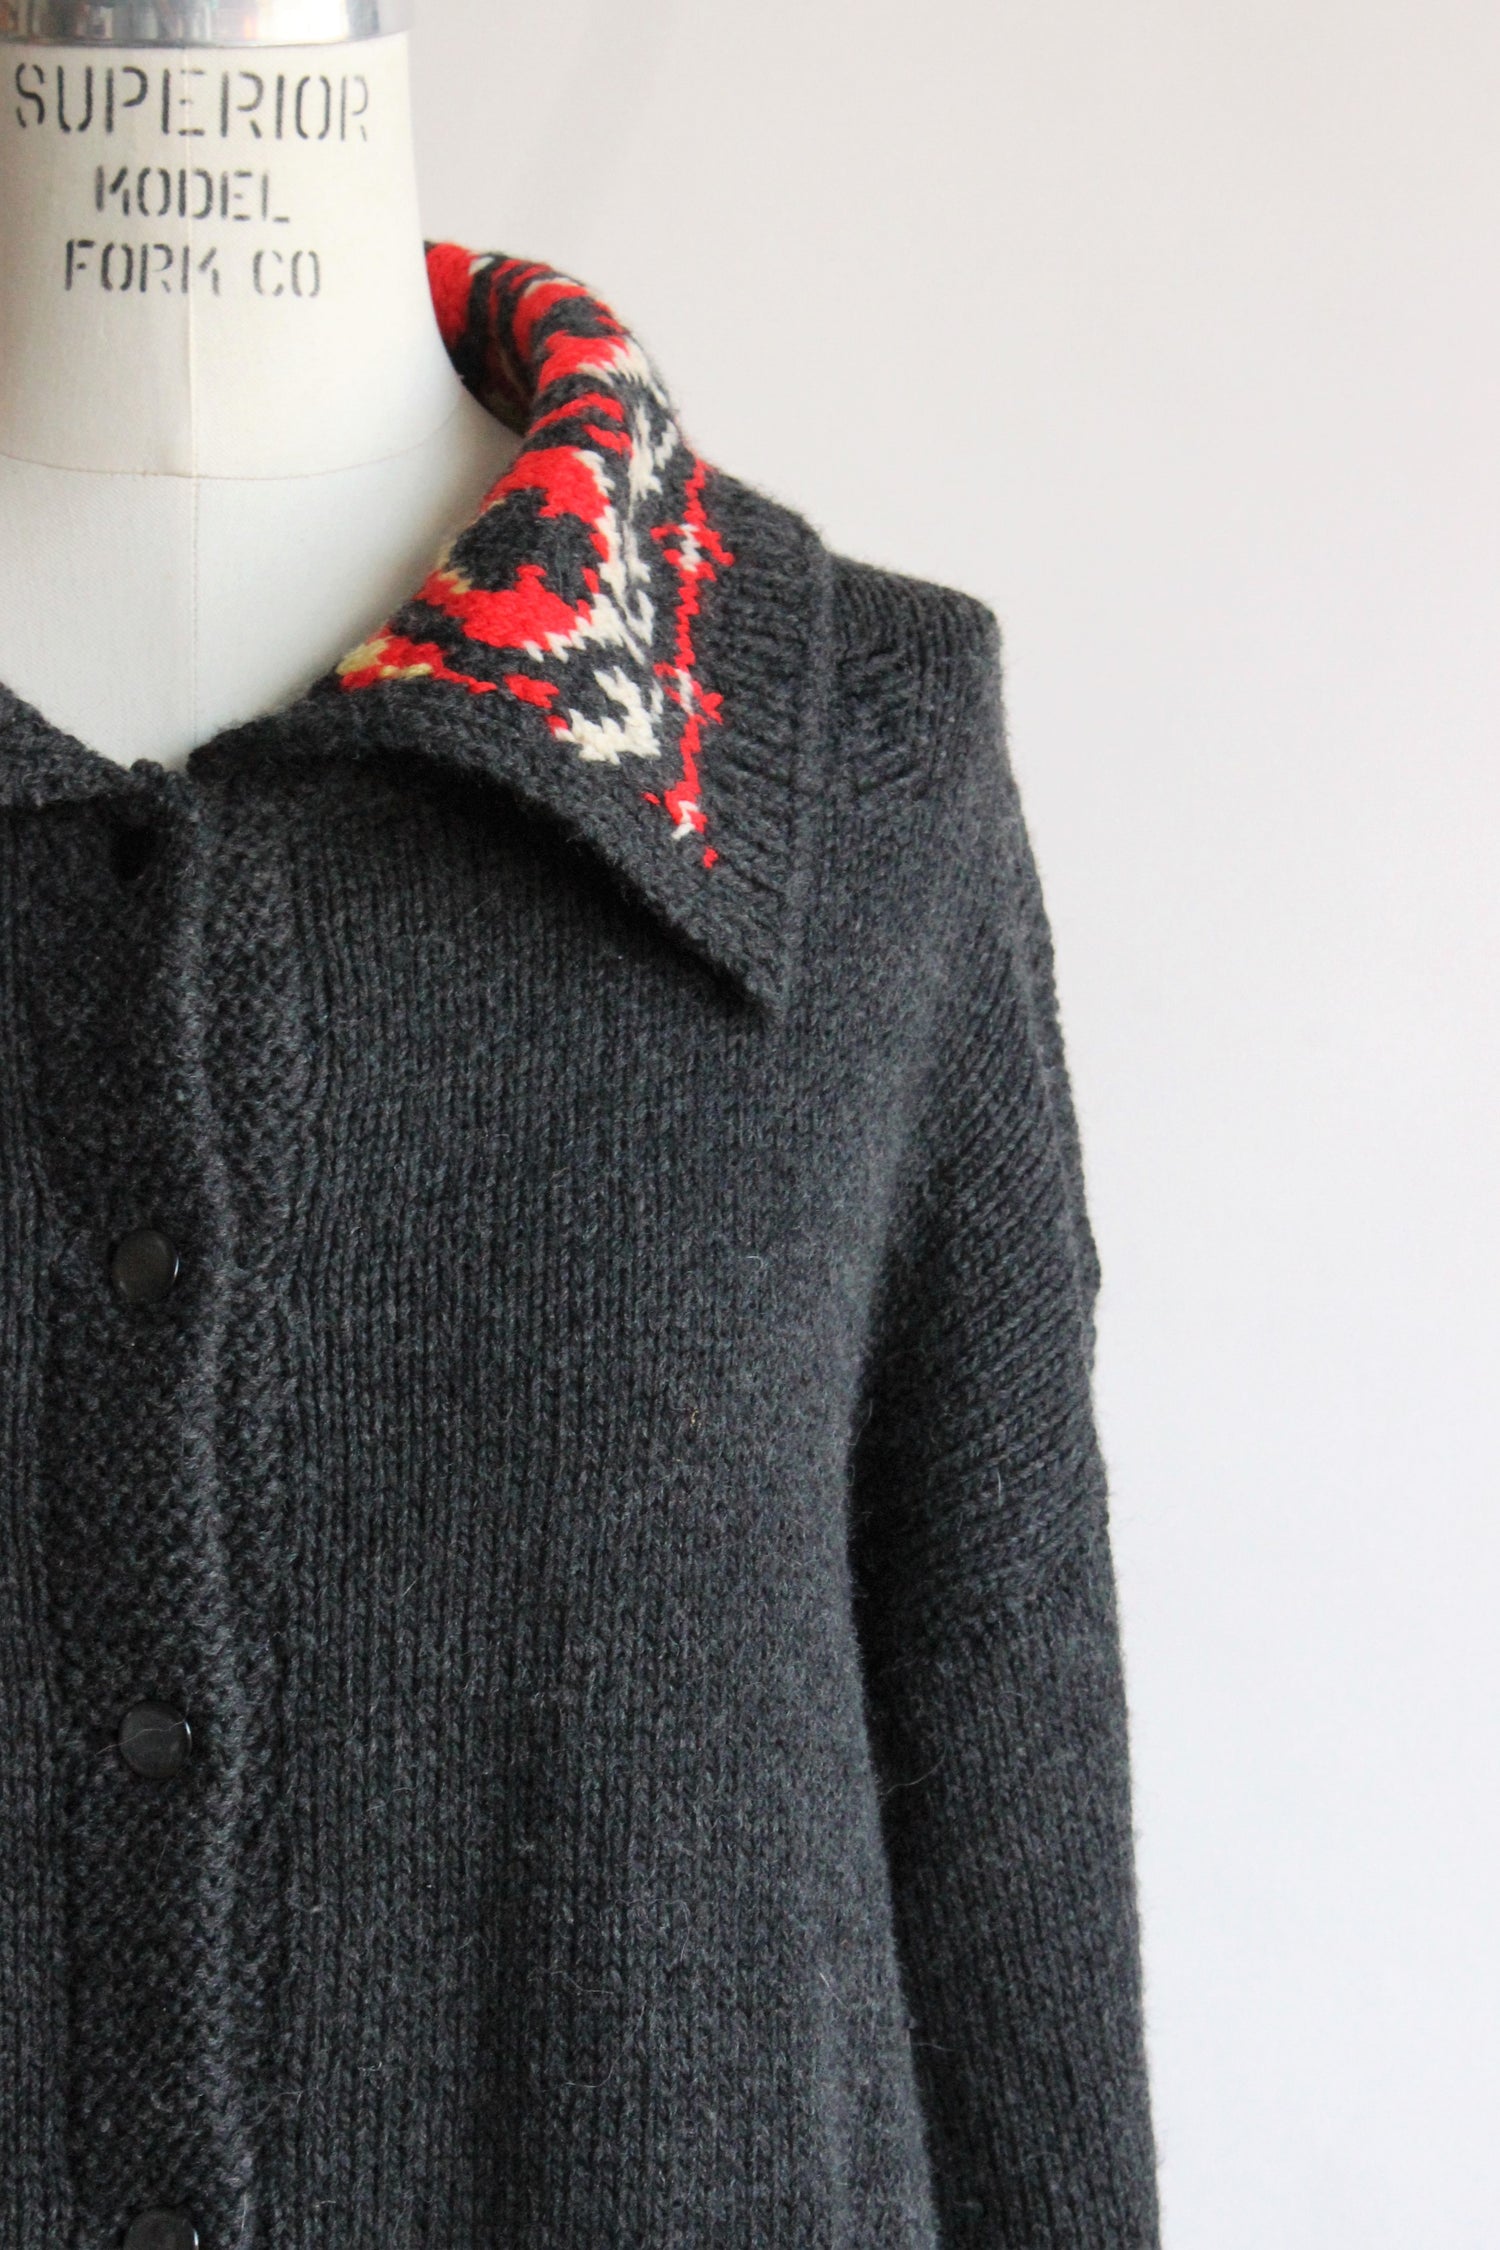 Vintage 1950s ish Nordic Sweater in Gray with Red and Yellow ...